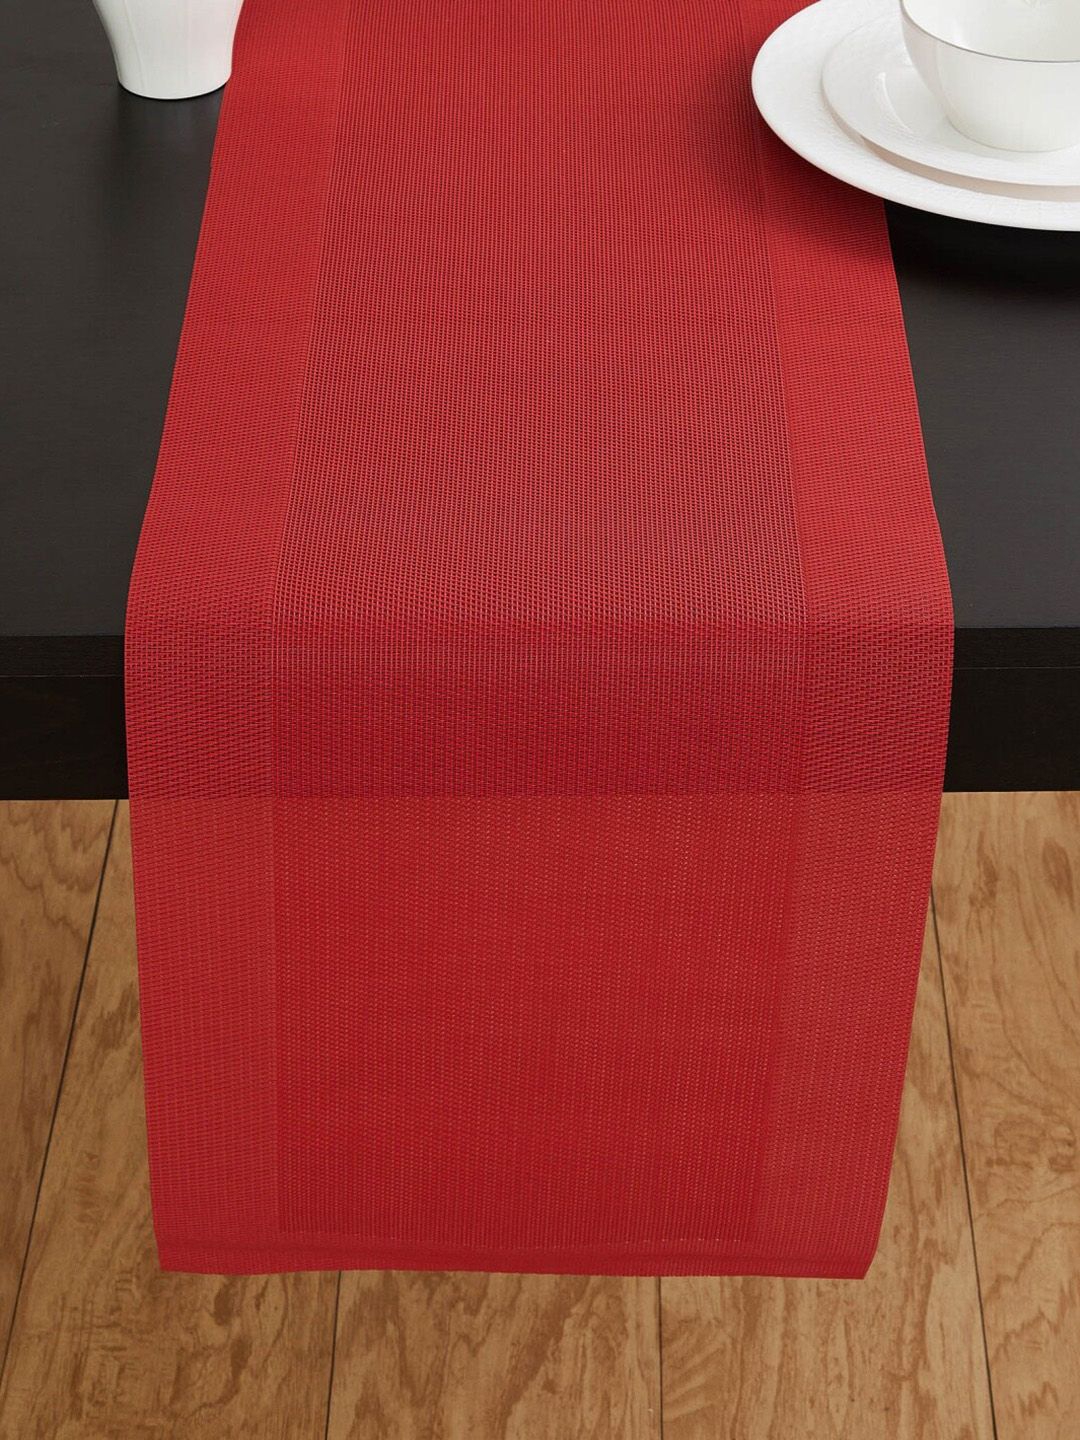 Home Centre Red Textured Cotton Table Runner Price in India